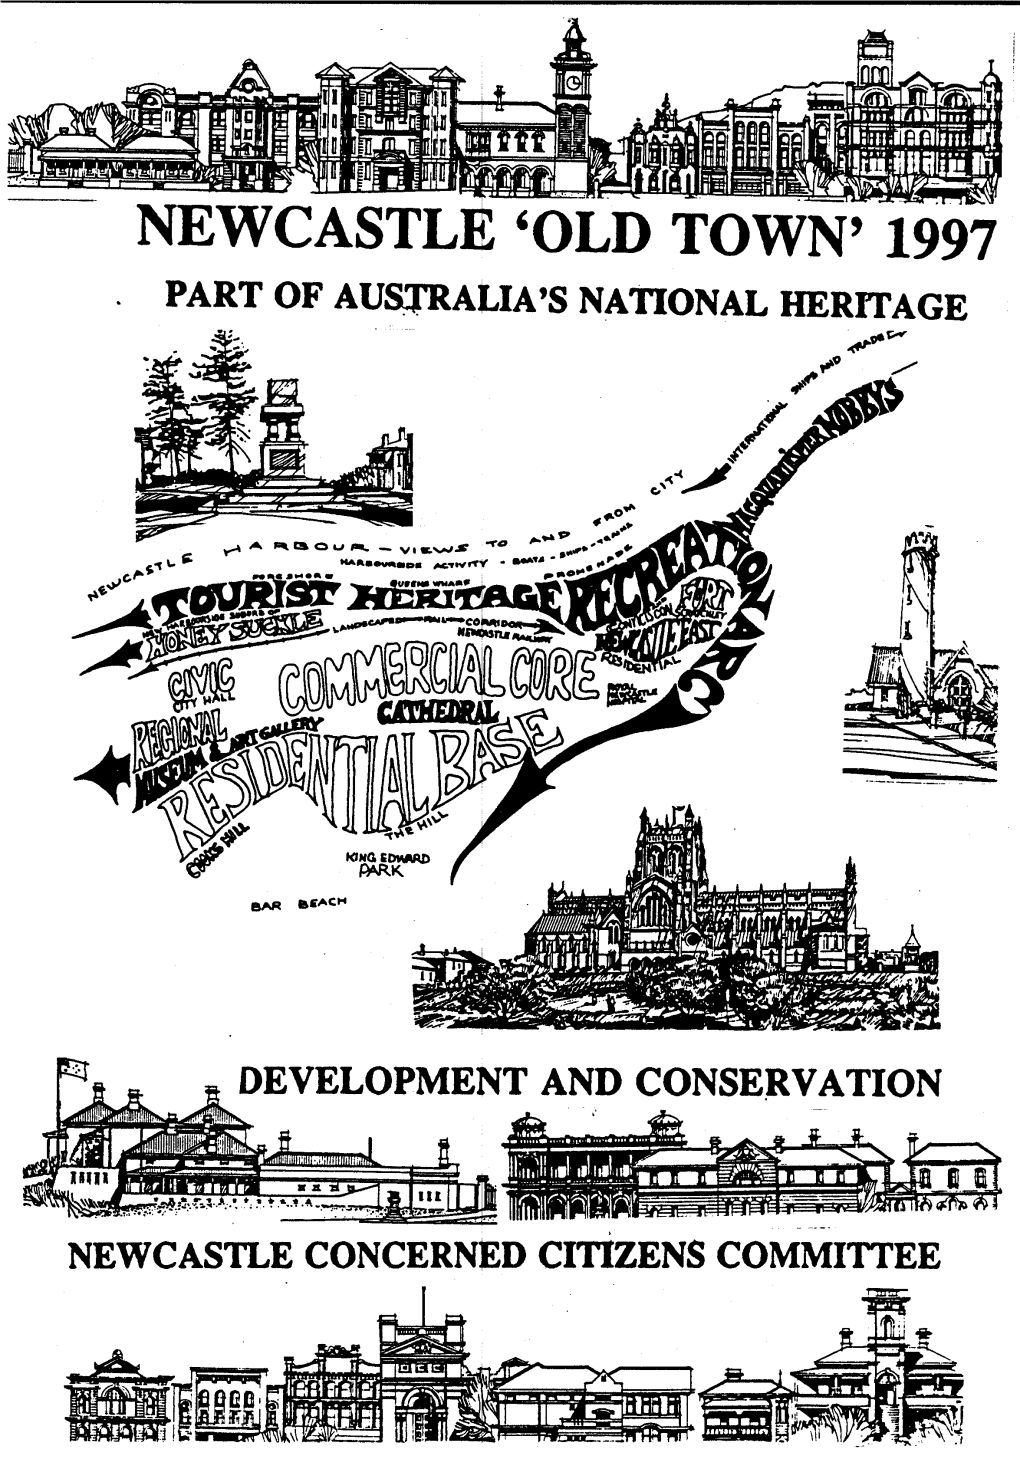 Newcastle 'Old Town' 1997: Part of Australia's National Heritage